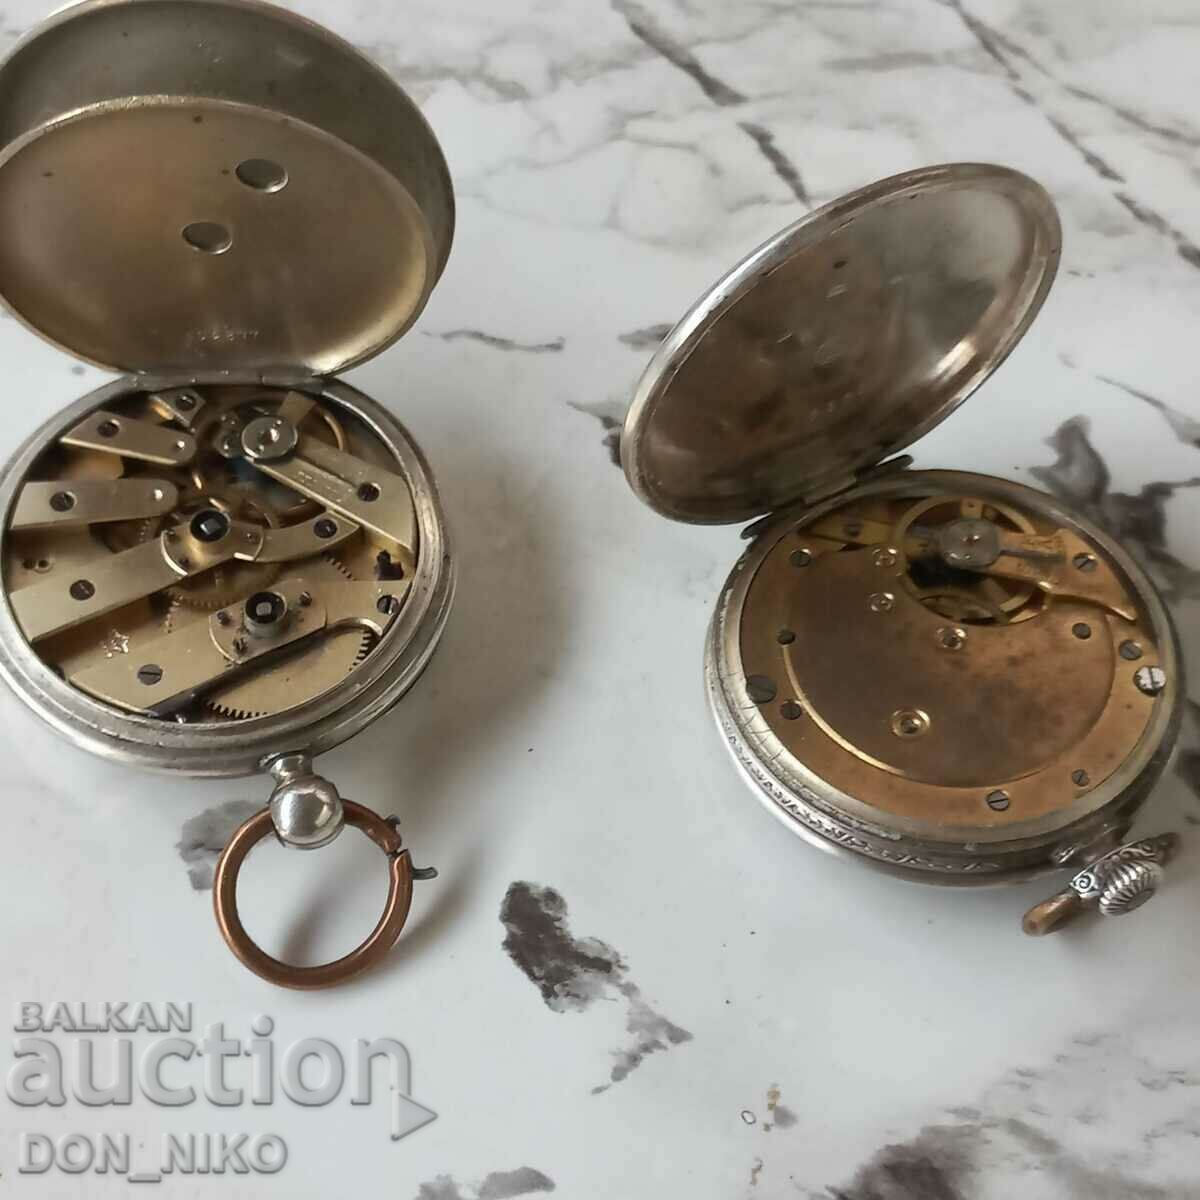 Pocket watches 2 pieces